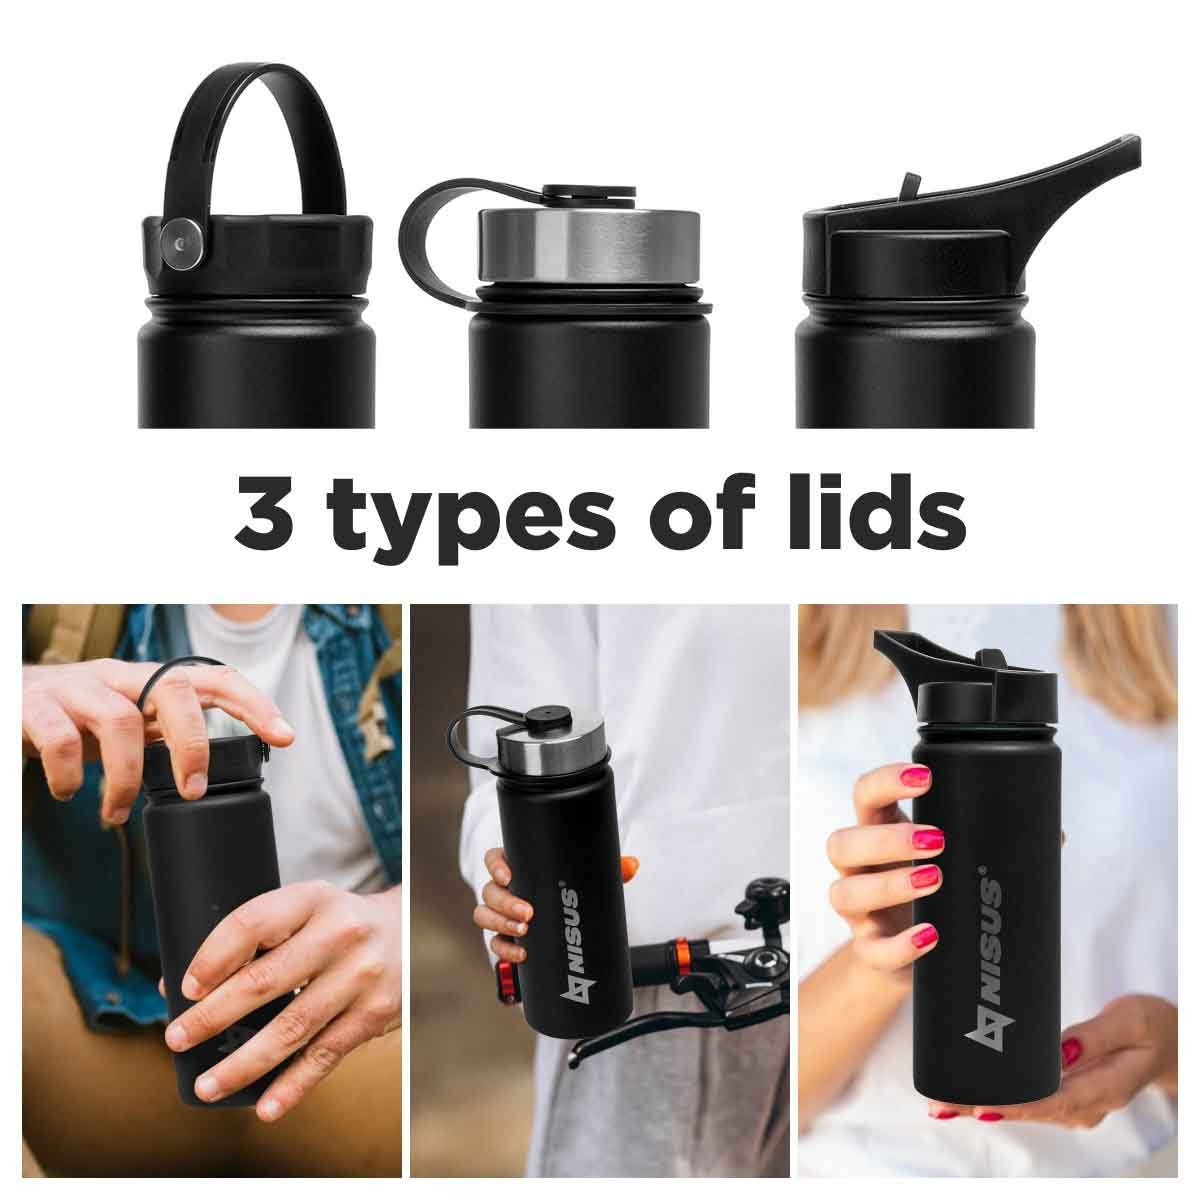 Stainless Steel Insulated Sport Water Bottle is featuring three lid types